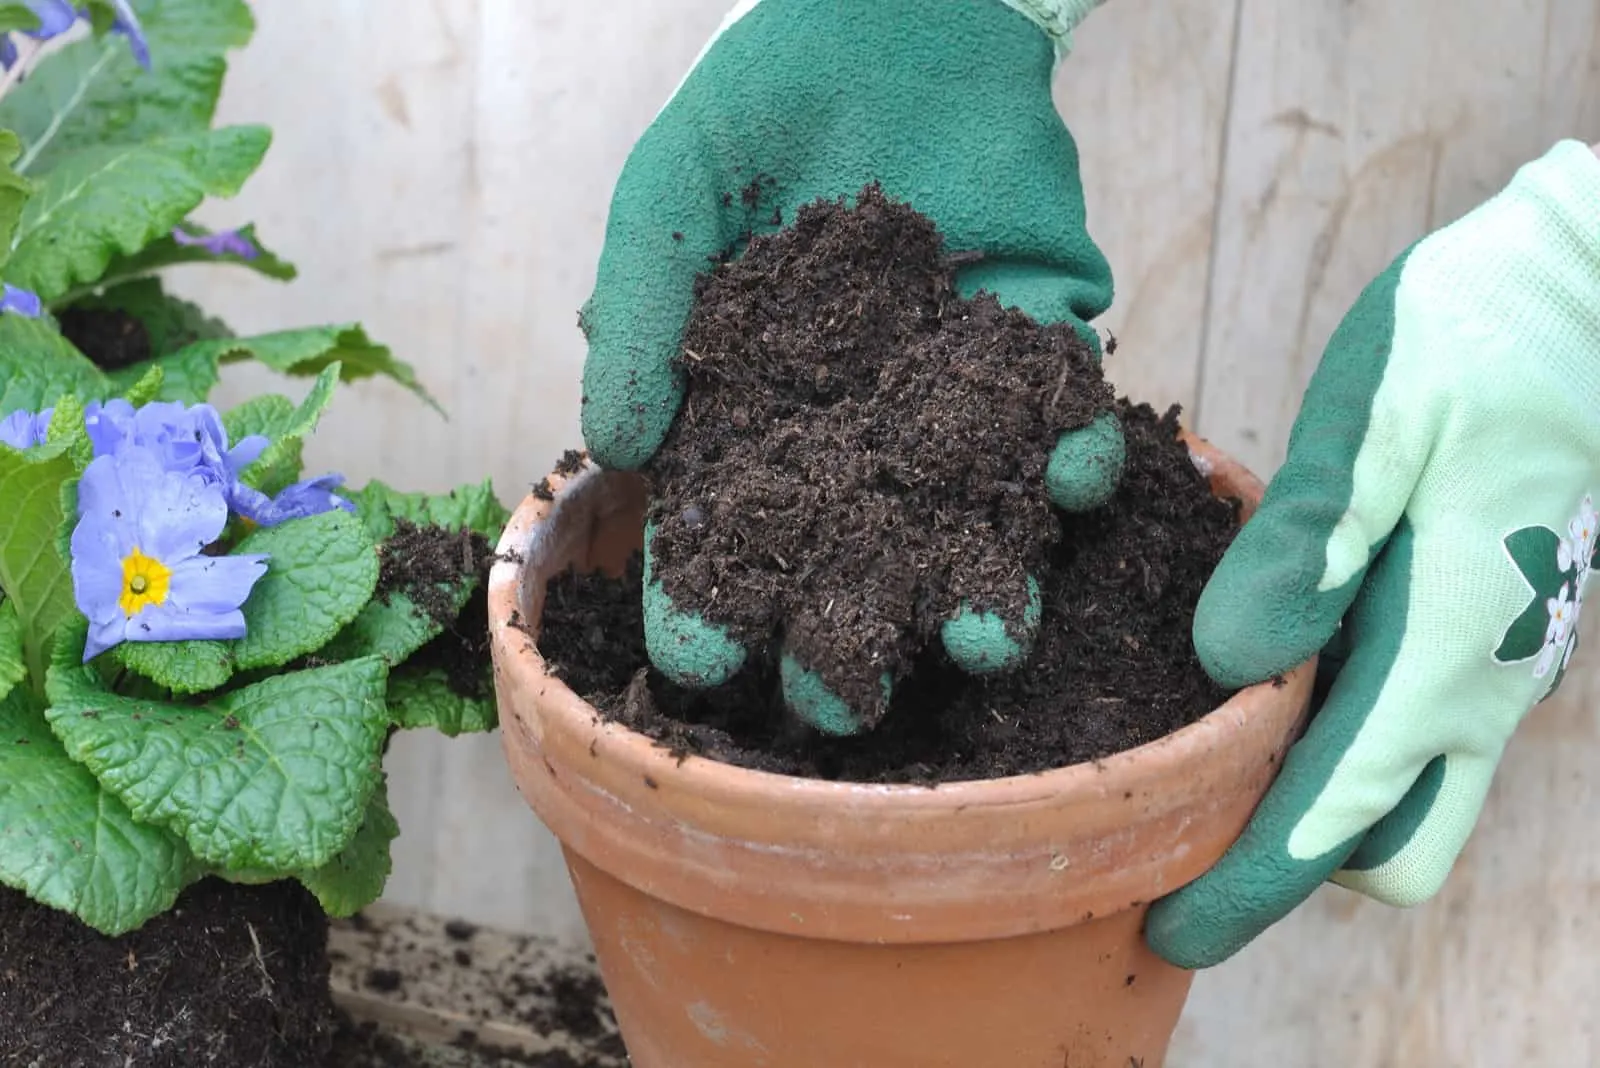 gloved hand holding loam over a flower pot